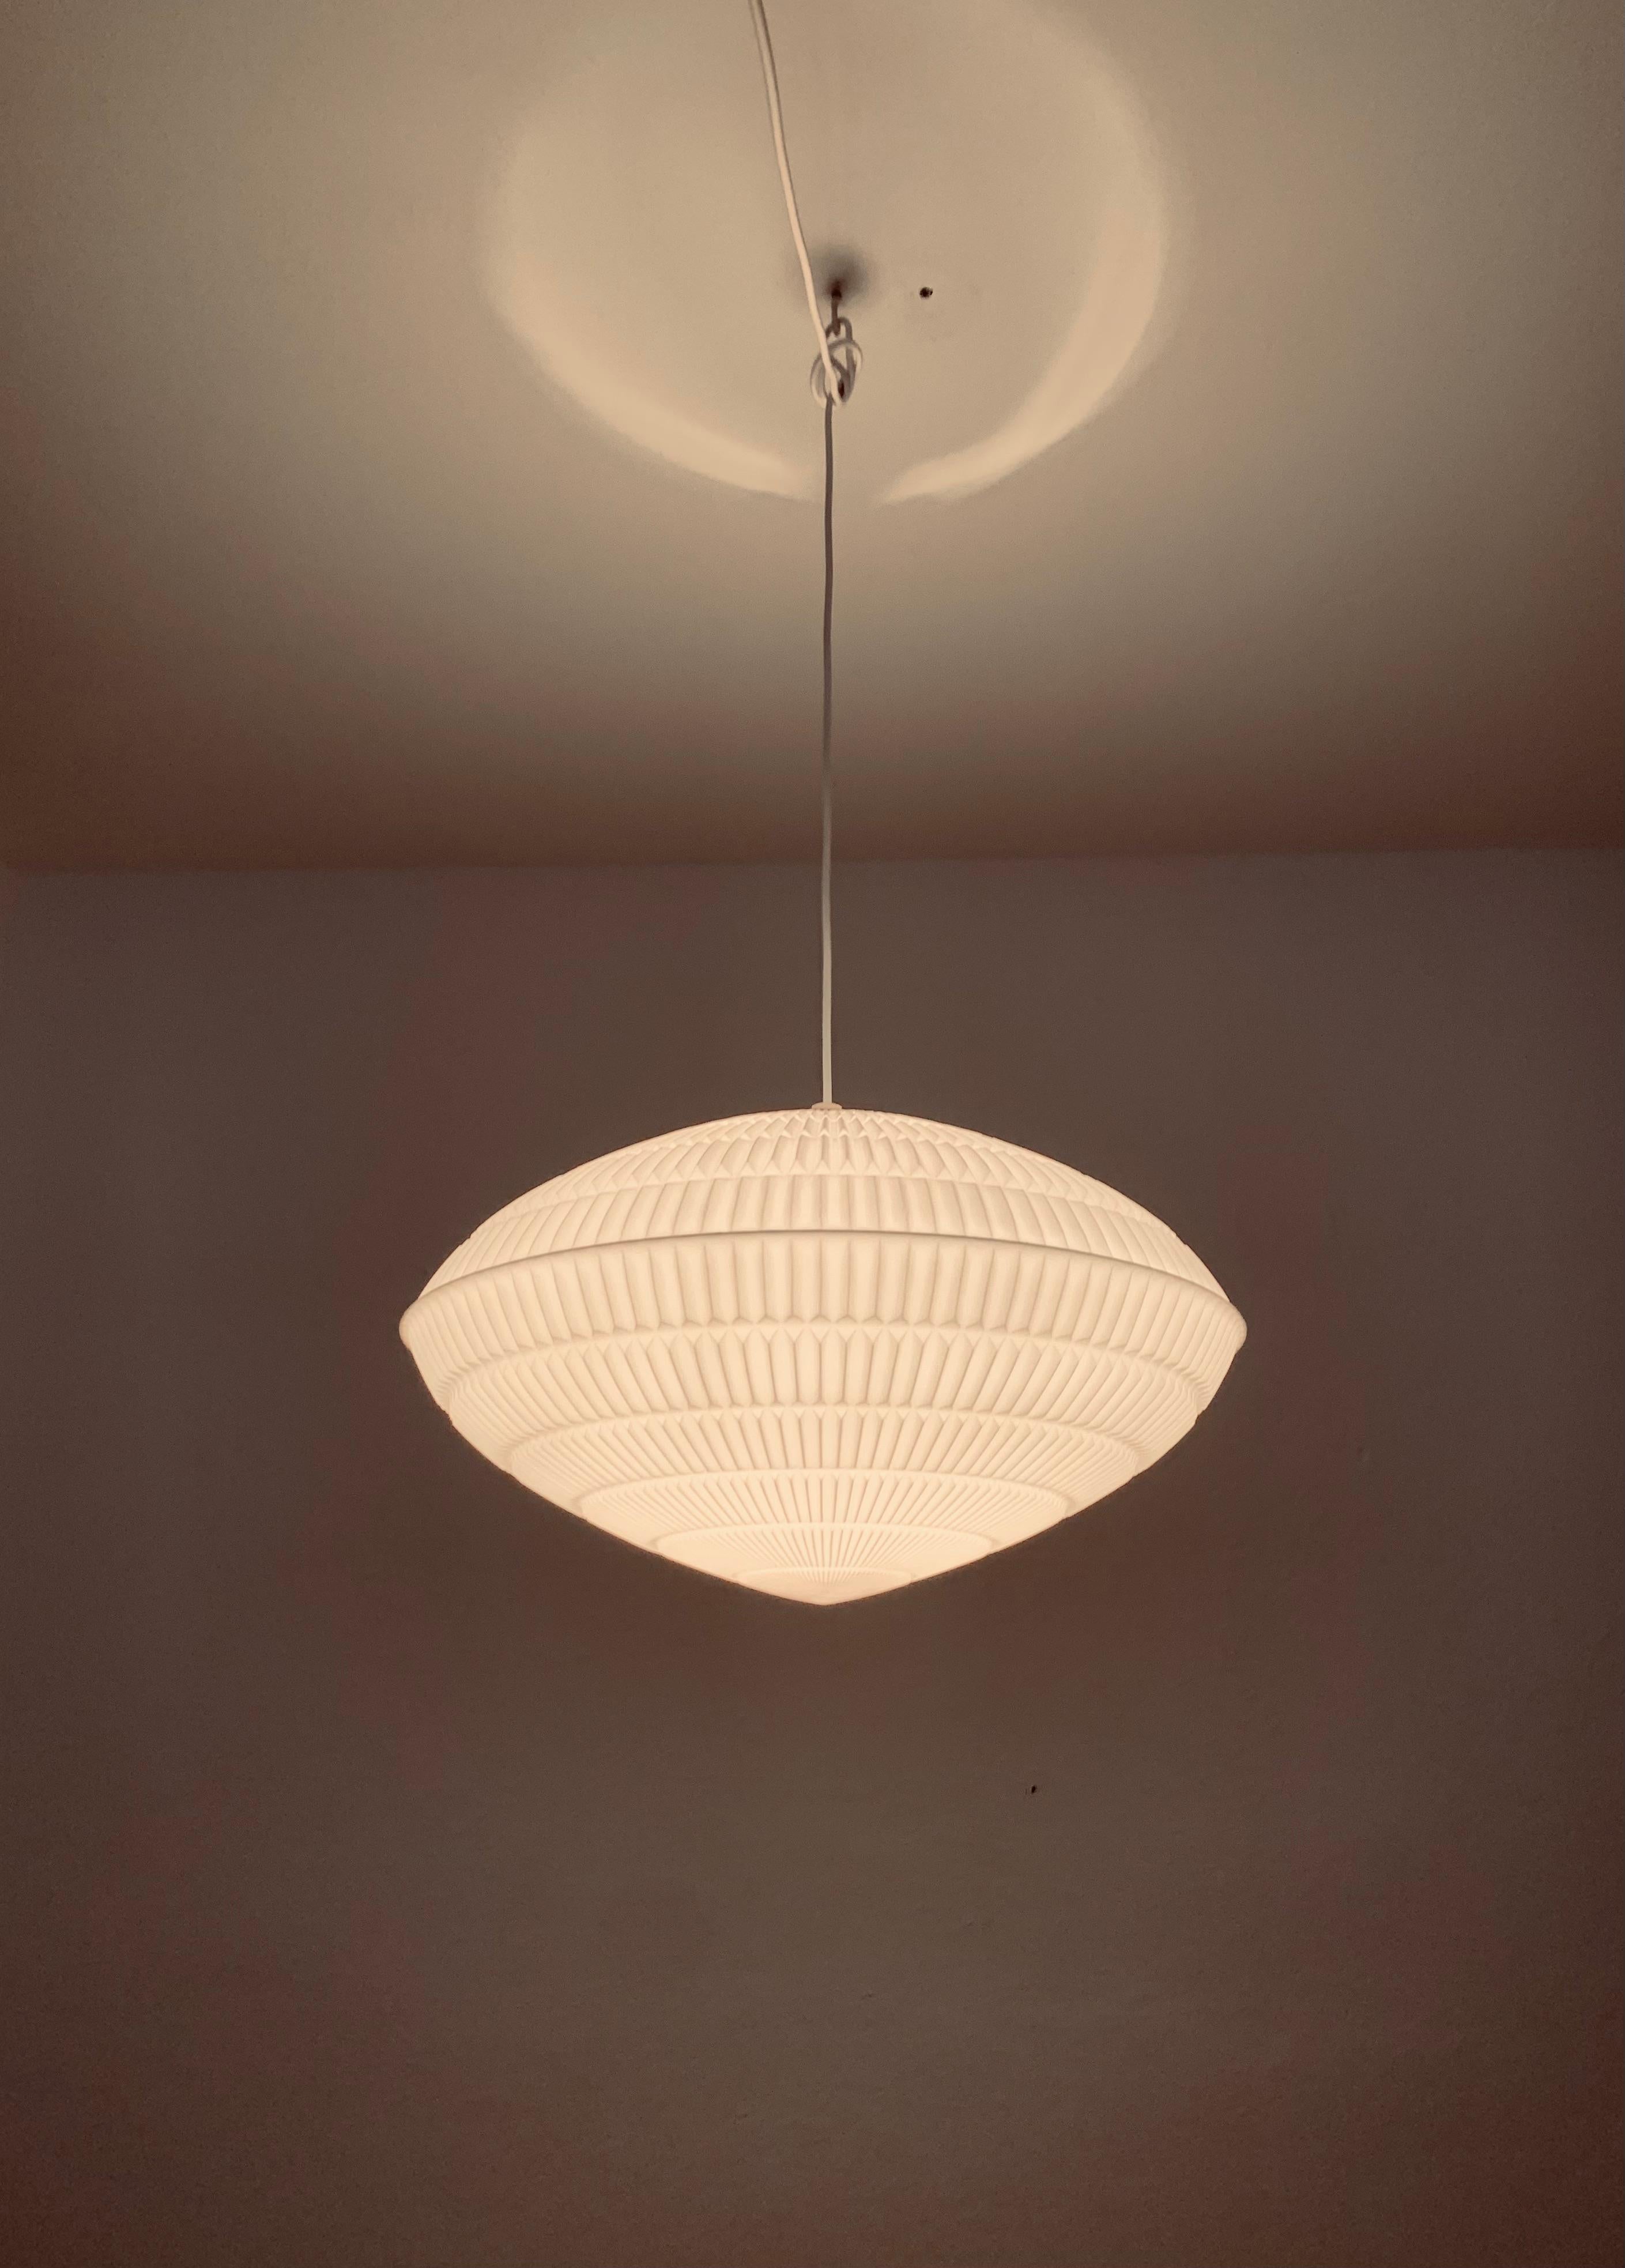  Origami pendant lamp by Aloys Gangkofner for Erco For Sale 1